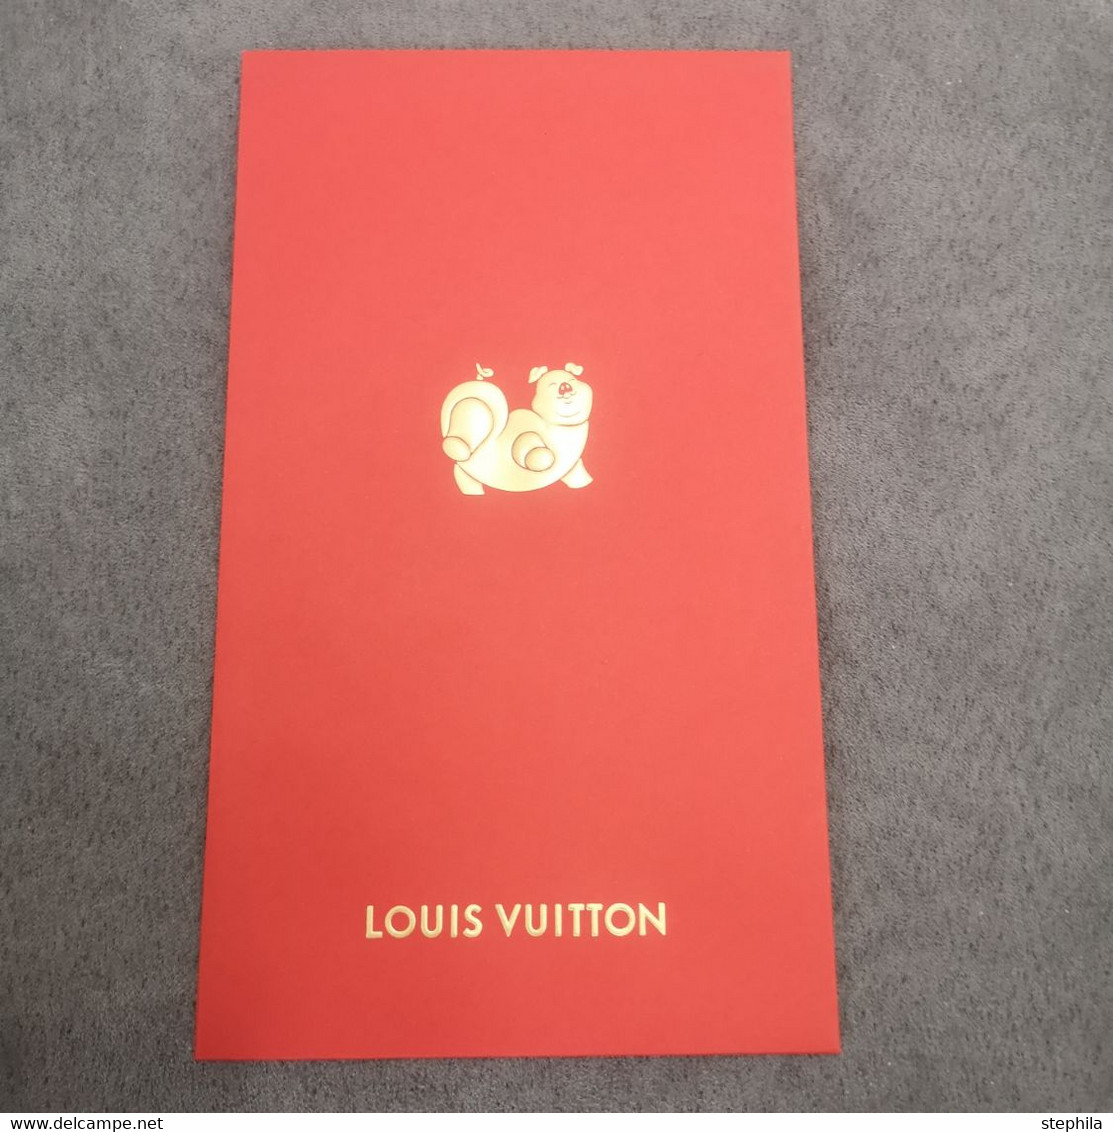 Louis Vuitton Phone Cases/Covers in Nairobi Central for sale